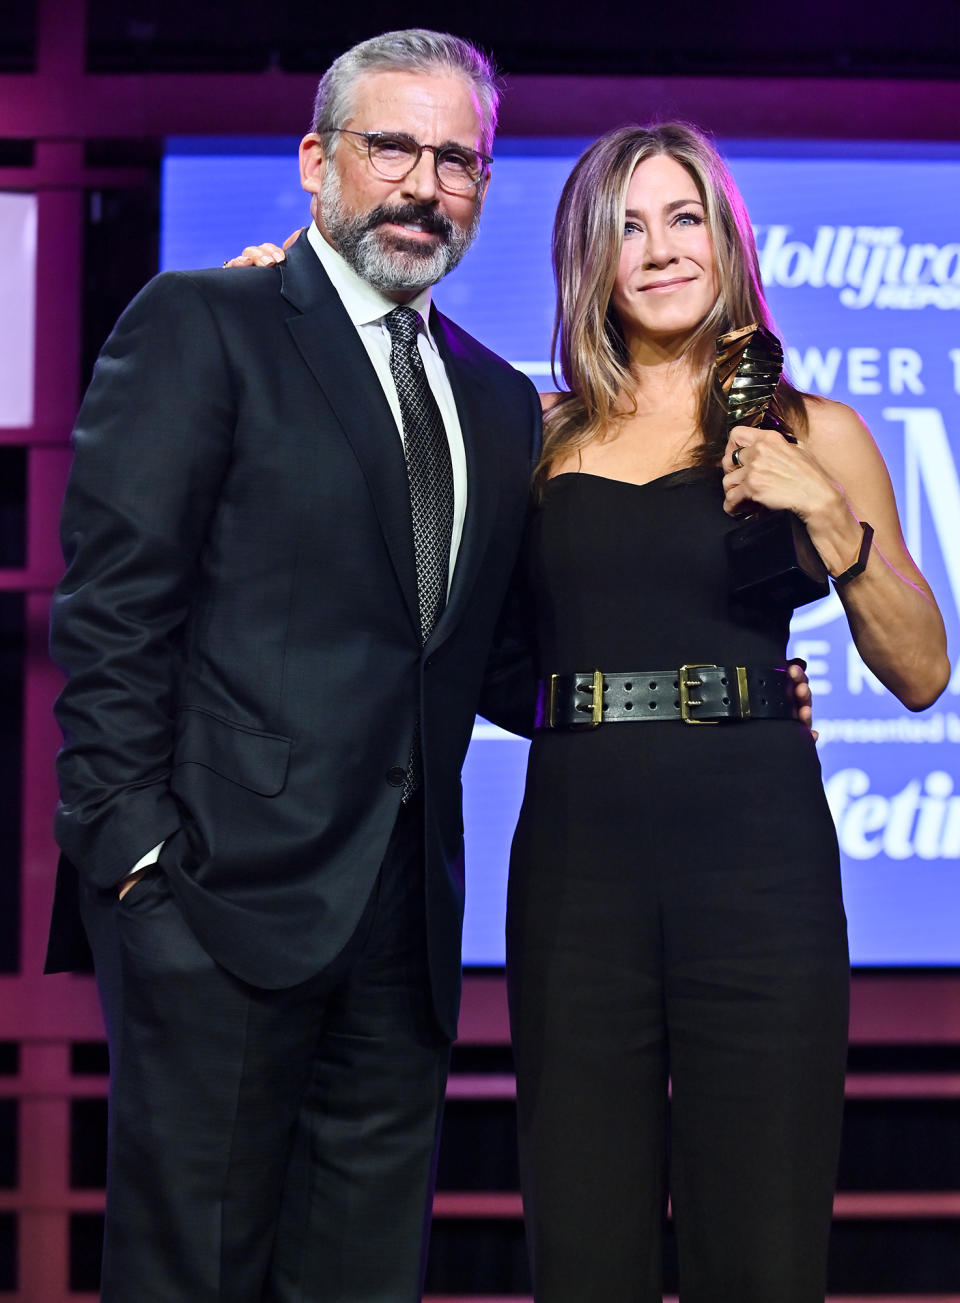 <p>Steve Carell presents The Sherry Lansing Leadership Award to honoree Jennifer Aniston at <em>The Hollywood Reporter</em>'s 2021 Women in Entertainment Power 100 event at Fairmont Century Plaza on Dec. 8 in L.A.</p>